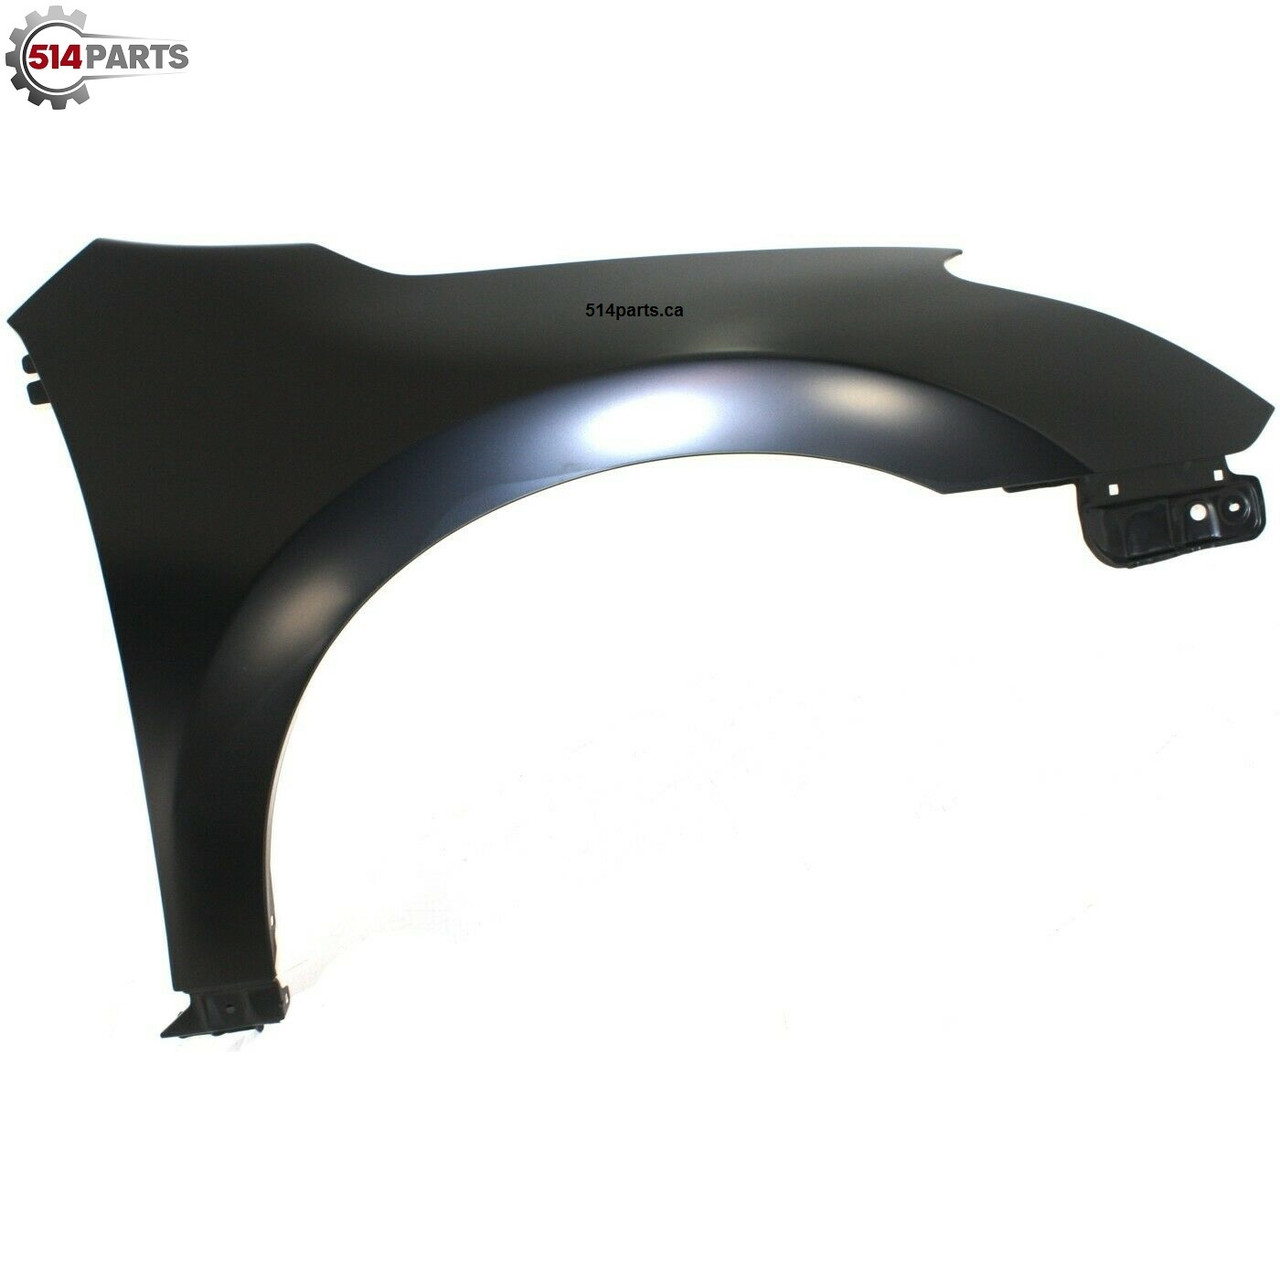 2008 - 2011 NISSAN ALTIMA COUPE CAPA Certified FRONT FENDERS - AILES AVANT CAPA Certifiee